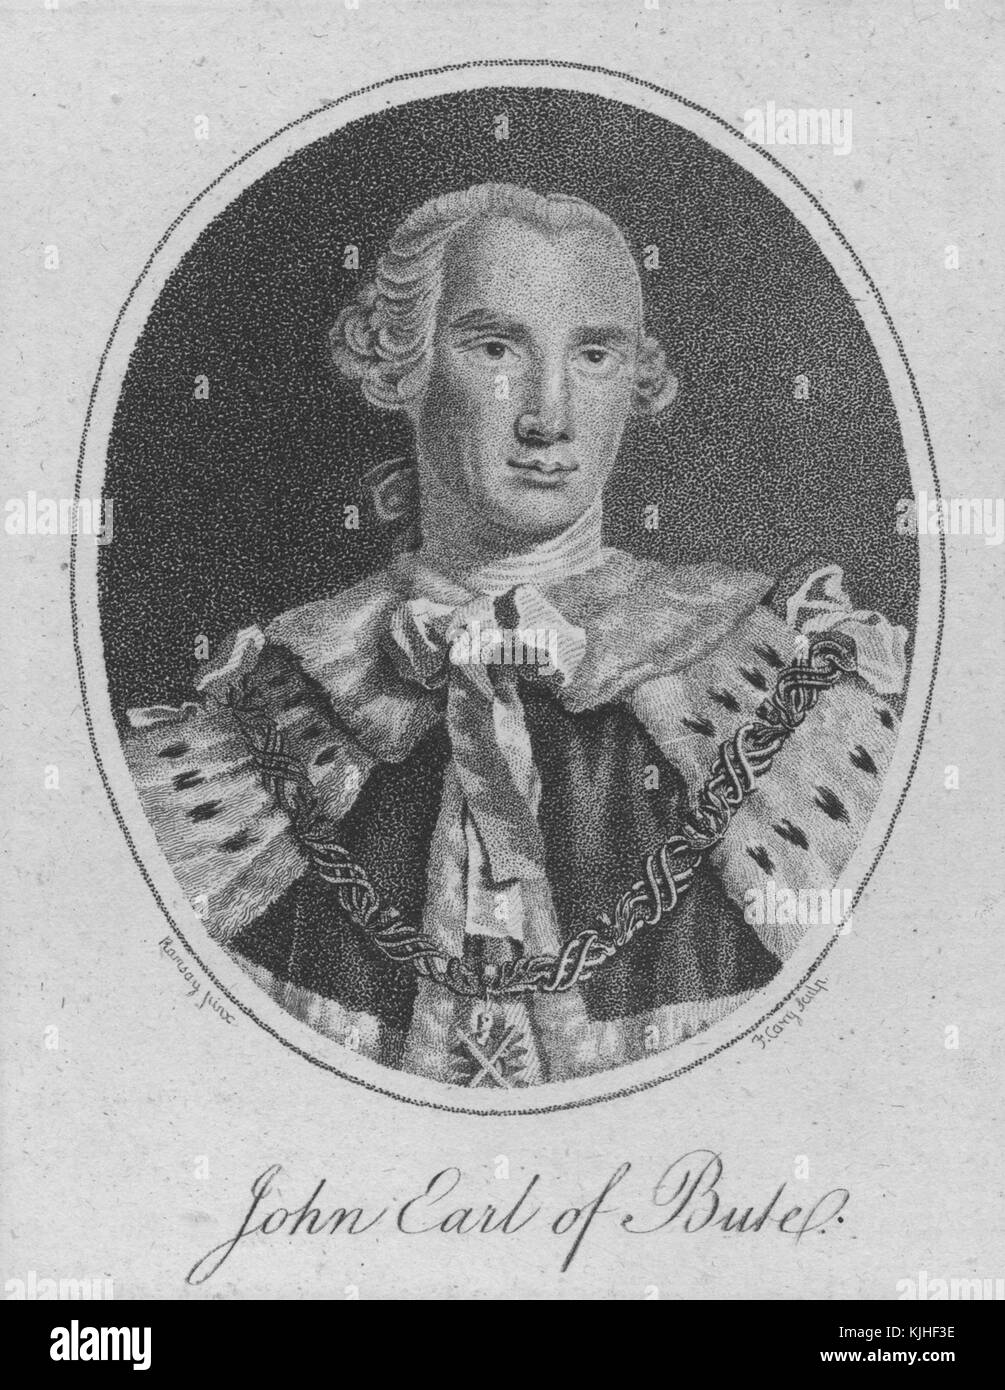 An engraving from a portrait of John Stuart, 3rd Earl of Bute, he served as Prime Minister of Great Britain under King George III, he was the first Prime Minister from Scotland following the creation of the United Kingdom 45 years earlier, he resigned from the office a little over a year later, Scotland, 1830. From the New York Public Library. Stock Photo